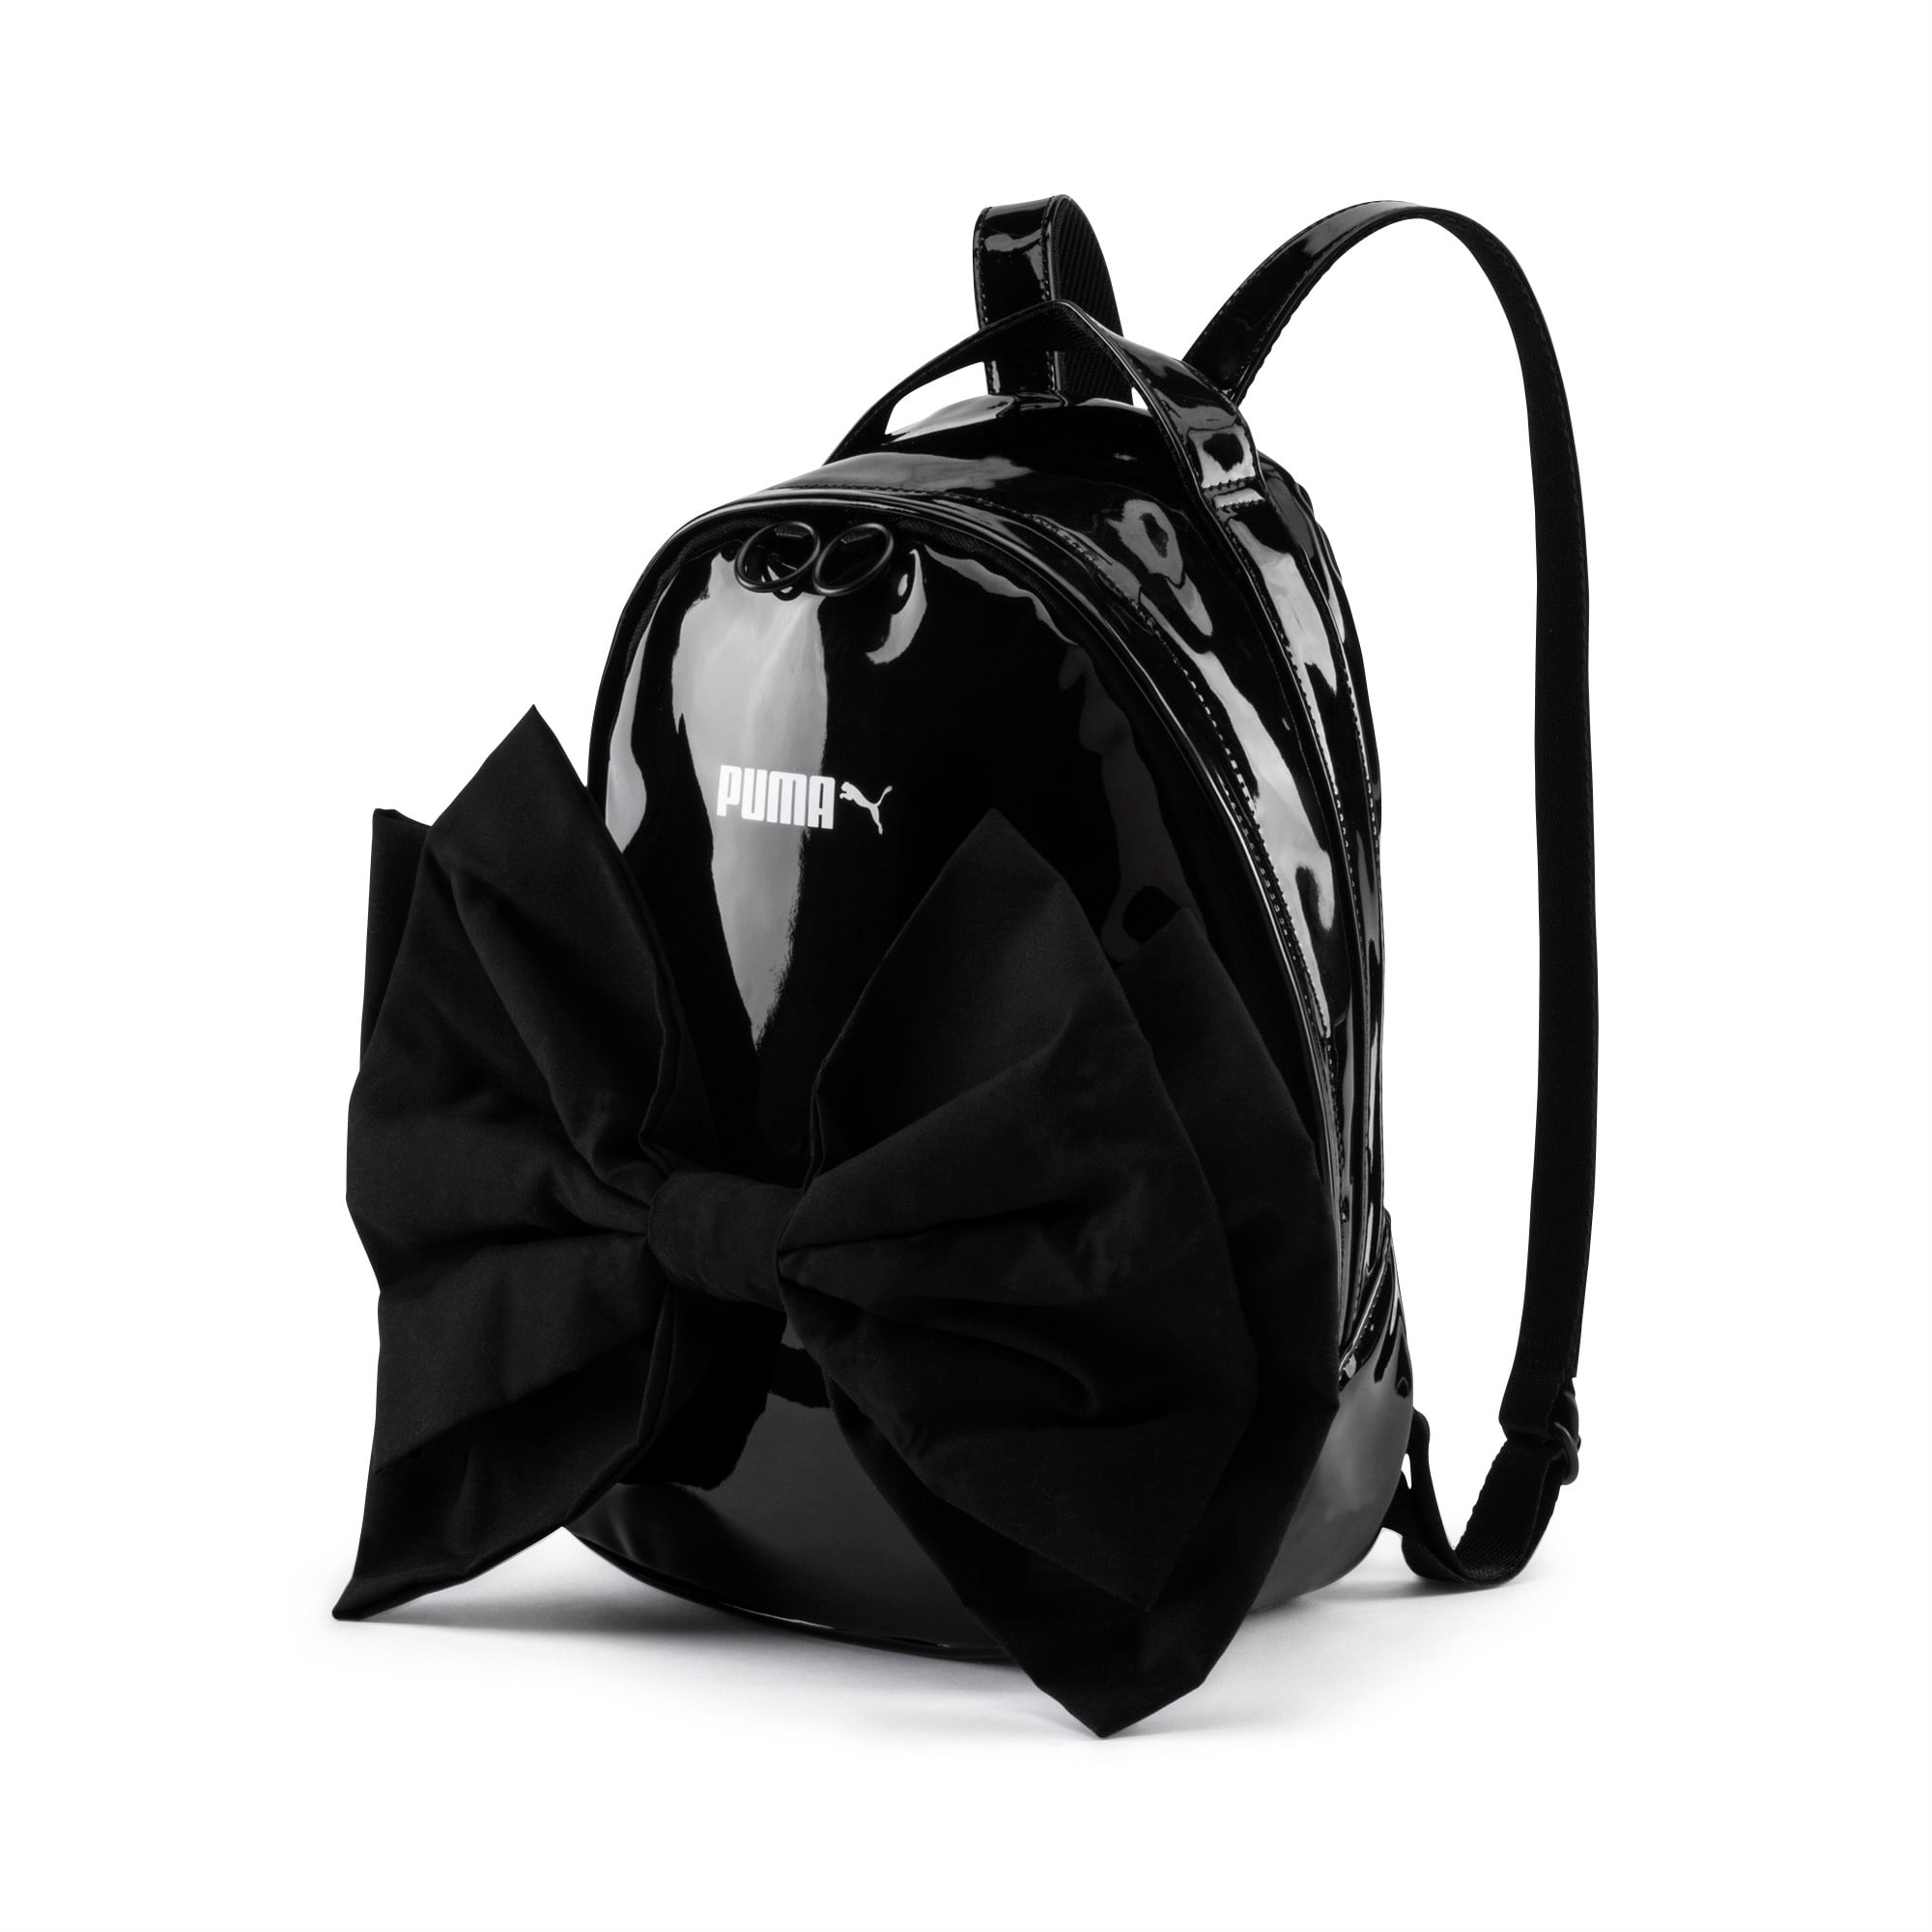 puma archive bow backpack